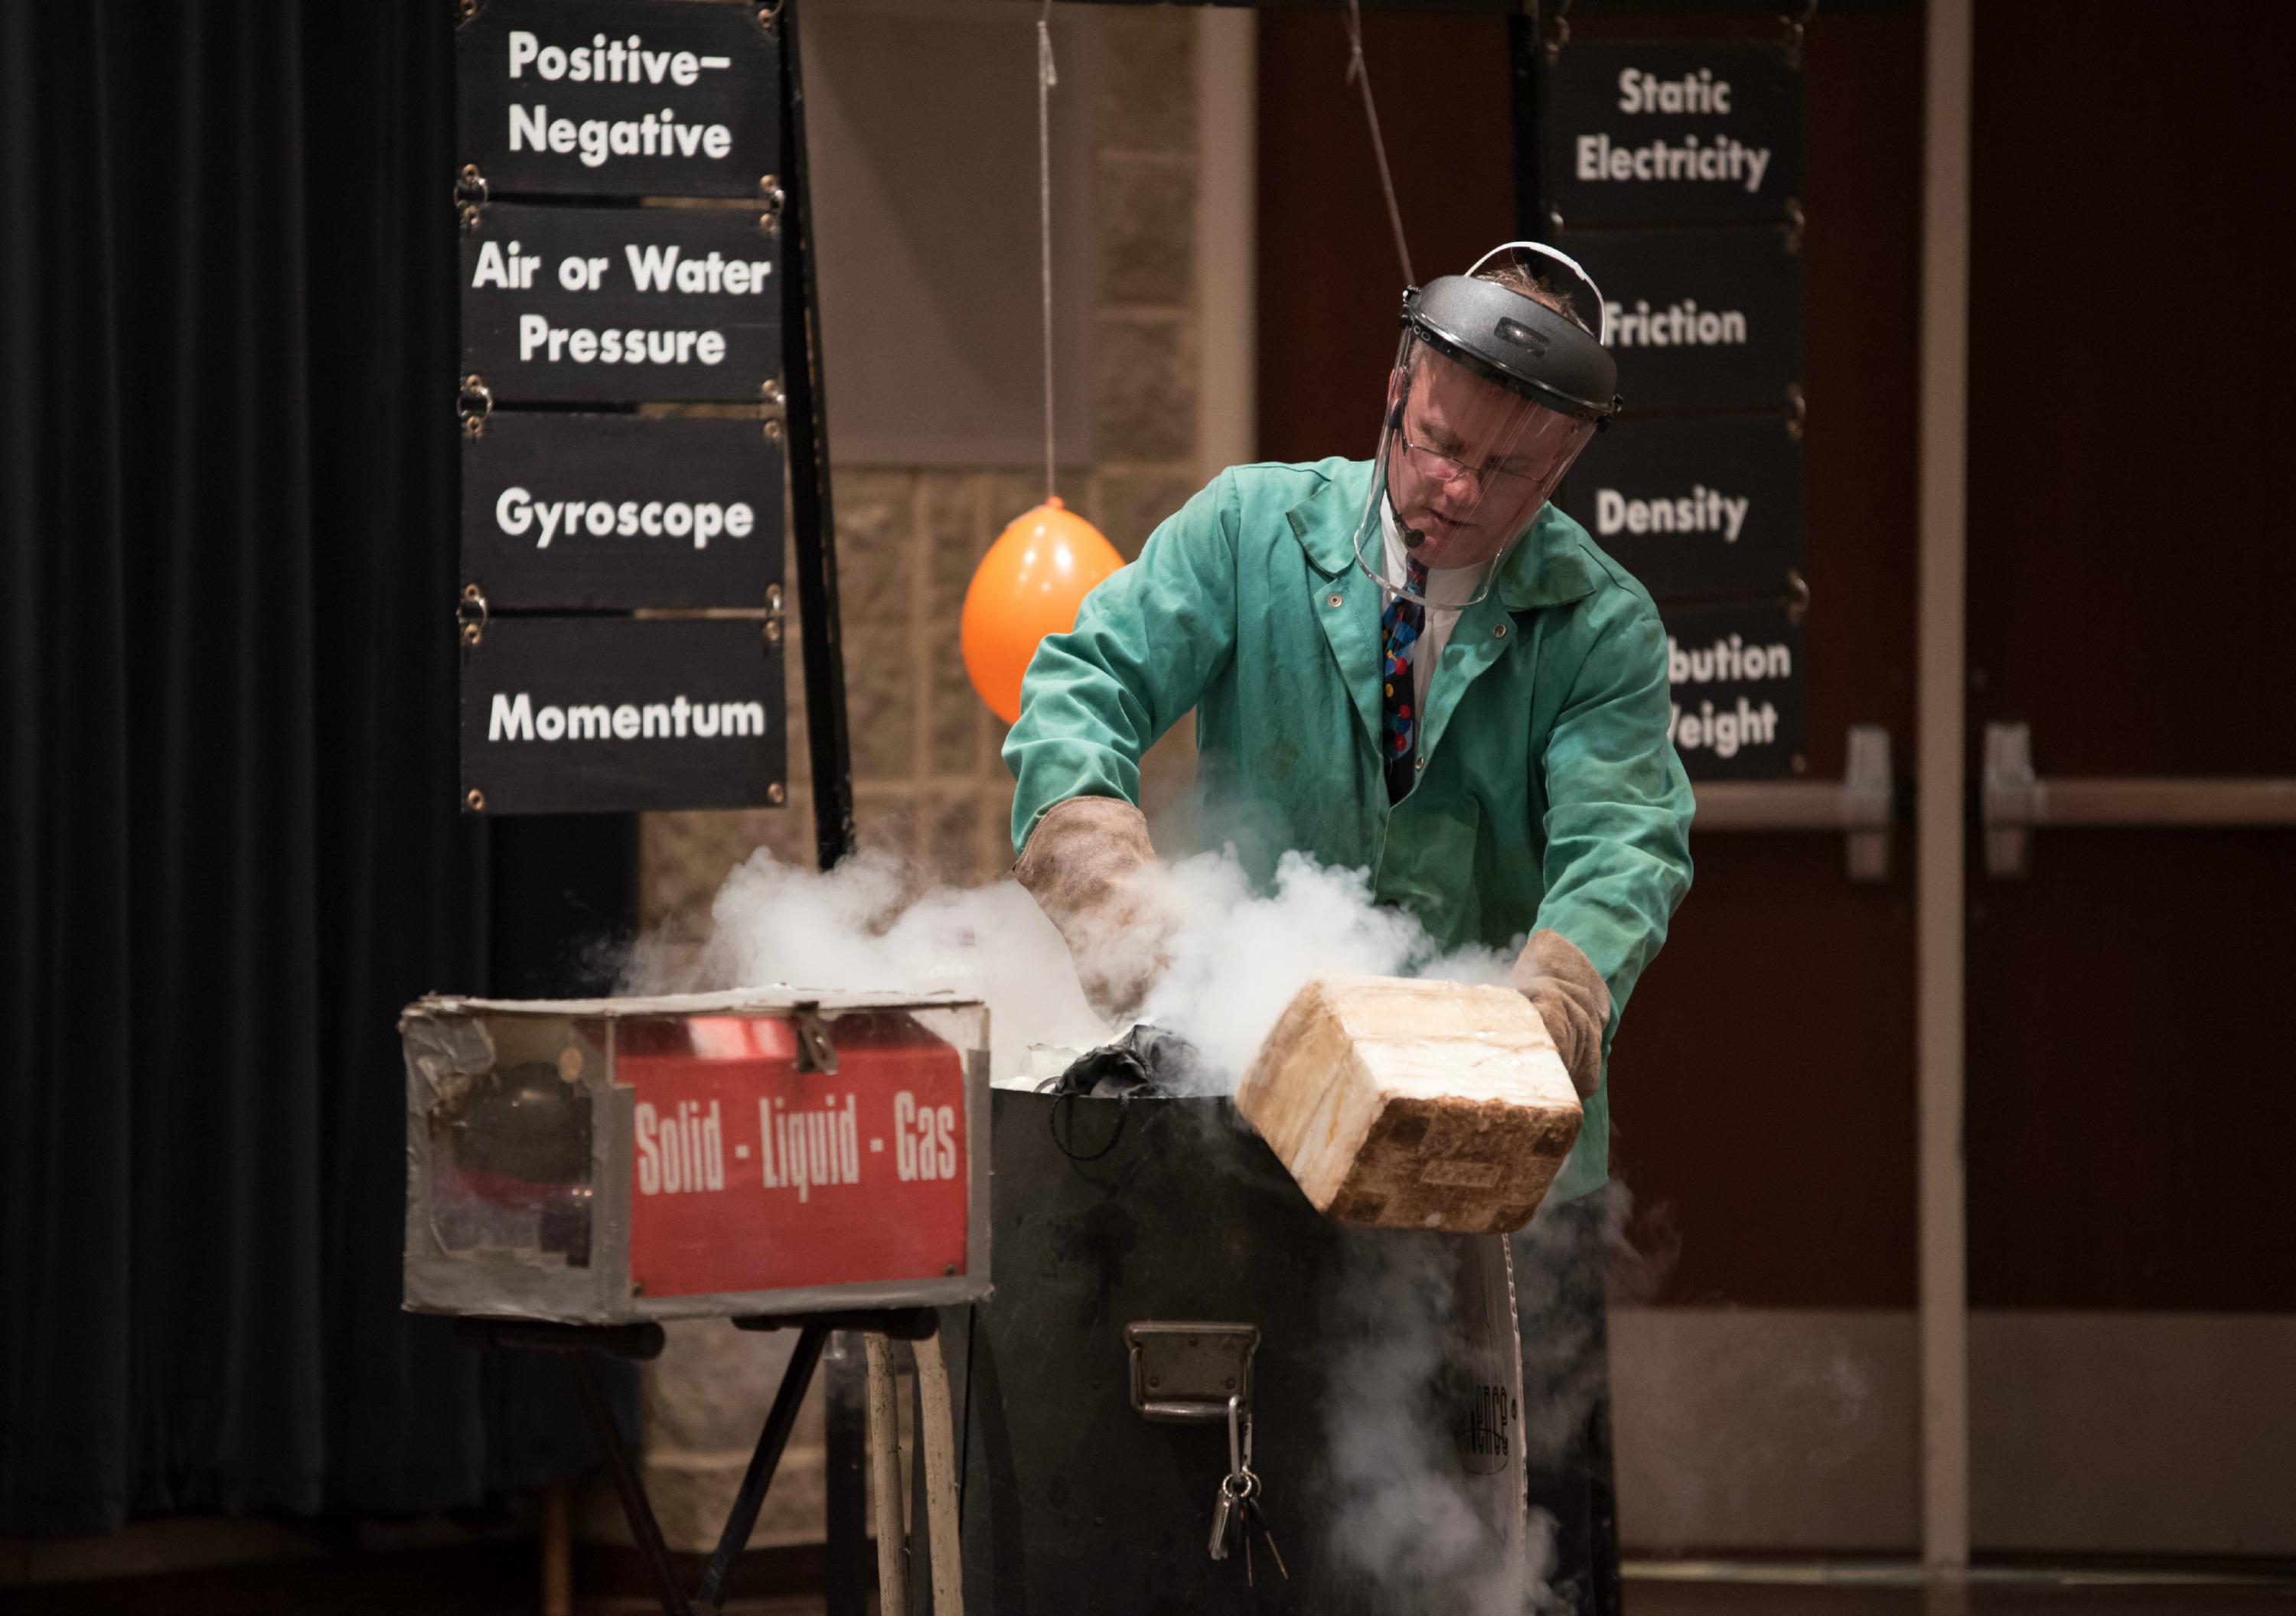 Scientist and magician Steve Belliveau makes a presentation to the audience at Prairie State College (PSC) iDiscover STEM Fun Day event. Belliveau’s presentation included experiments with electro magnets, friction and liquid nitrogen.